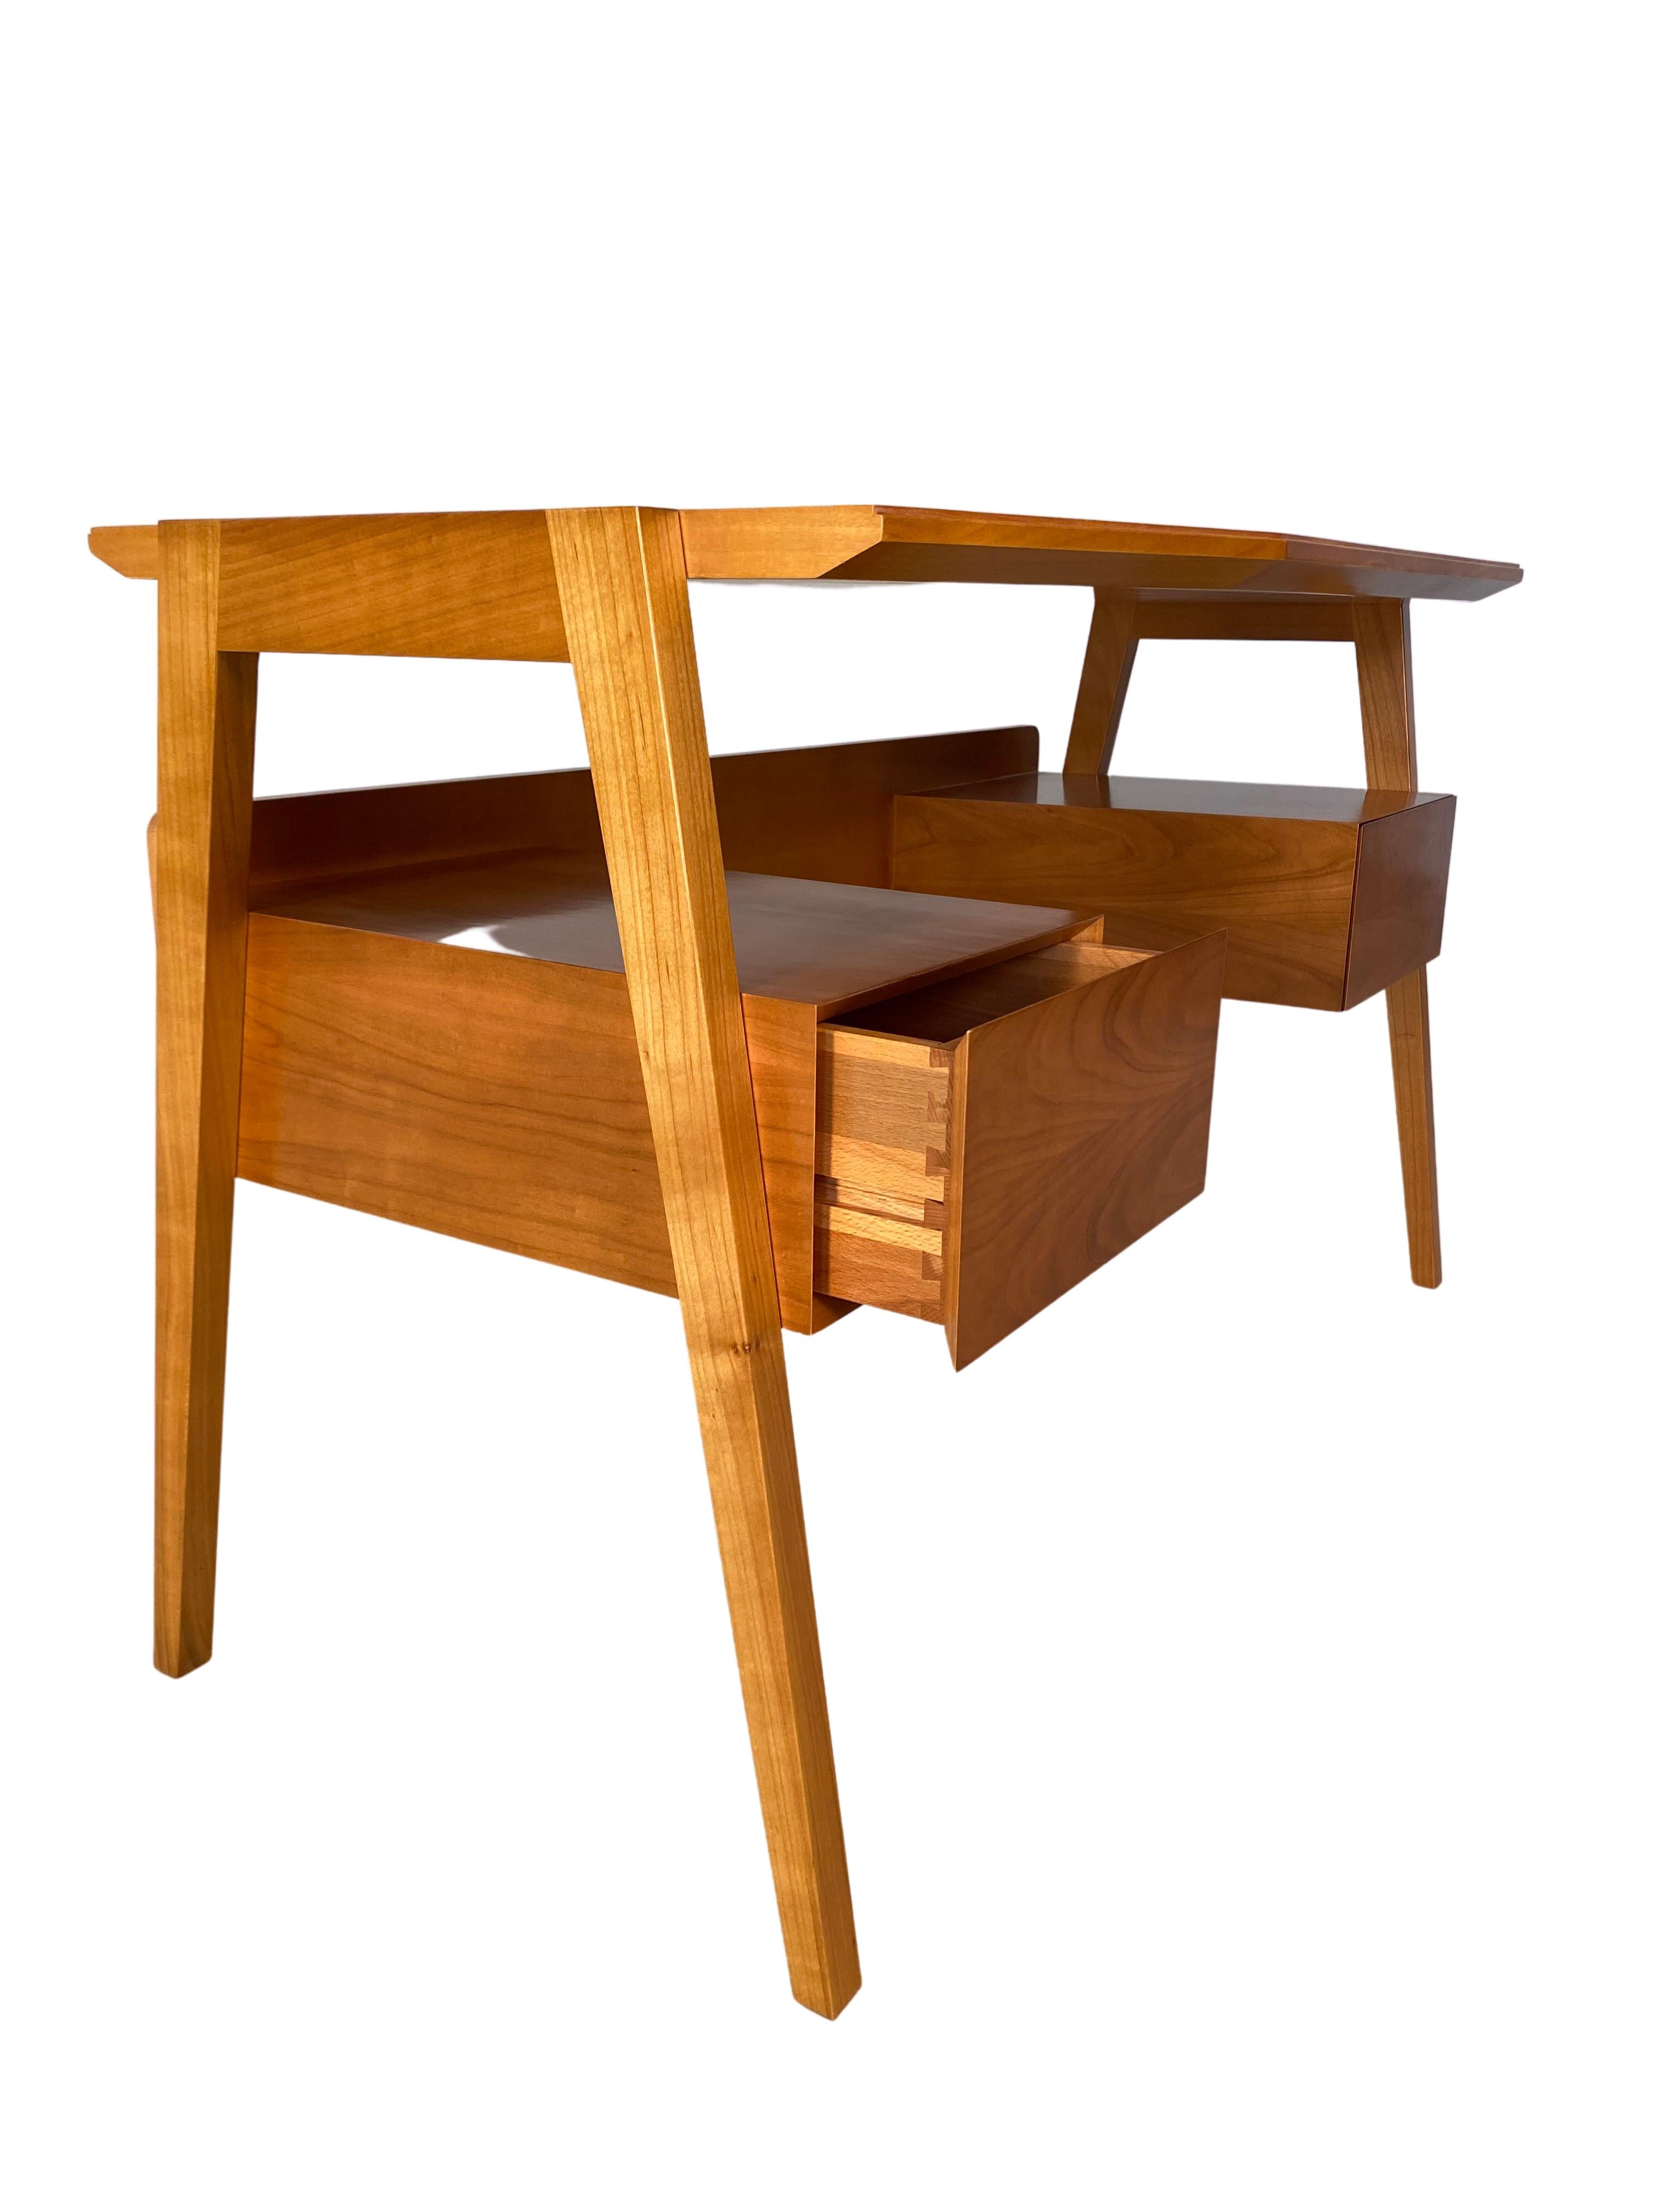 Midcentury Style Wooden Writing Desk with Drawers, by Morelato 4